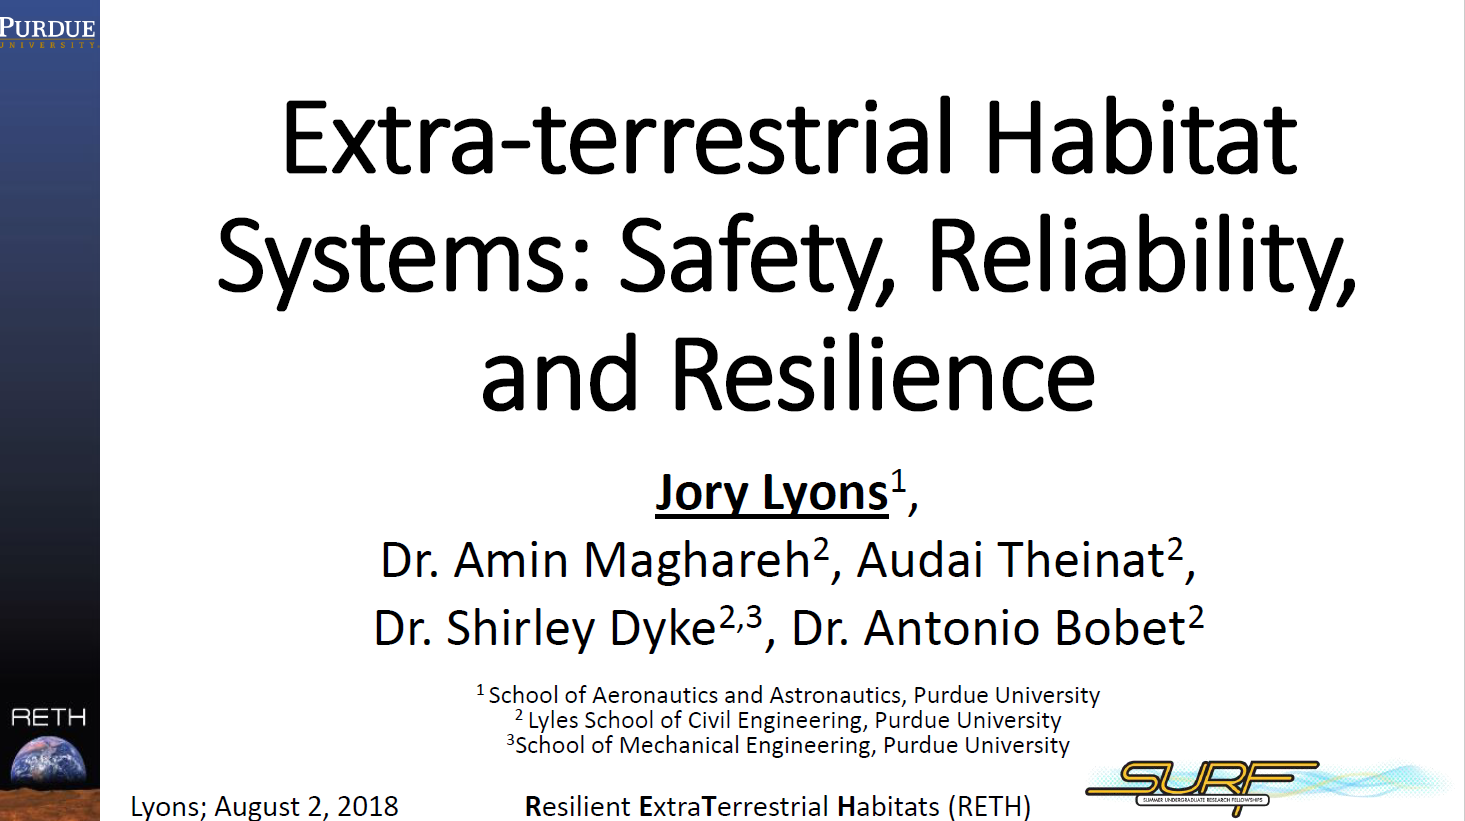 Extra-terrestrial Habitat Systems: Safety, Reliability, and Resilience